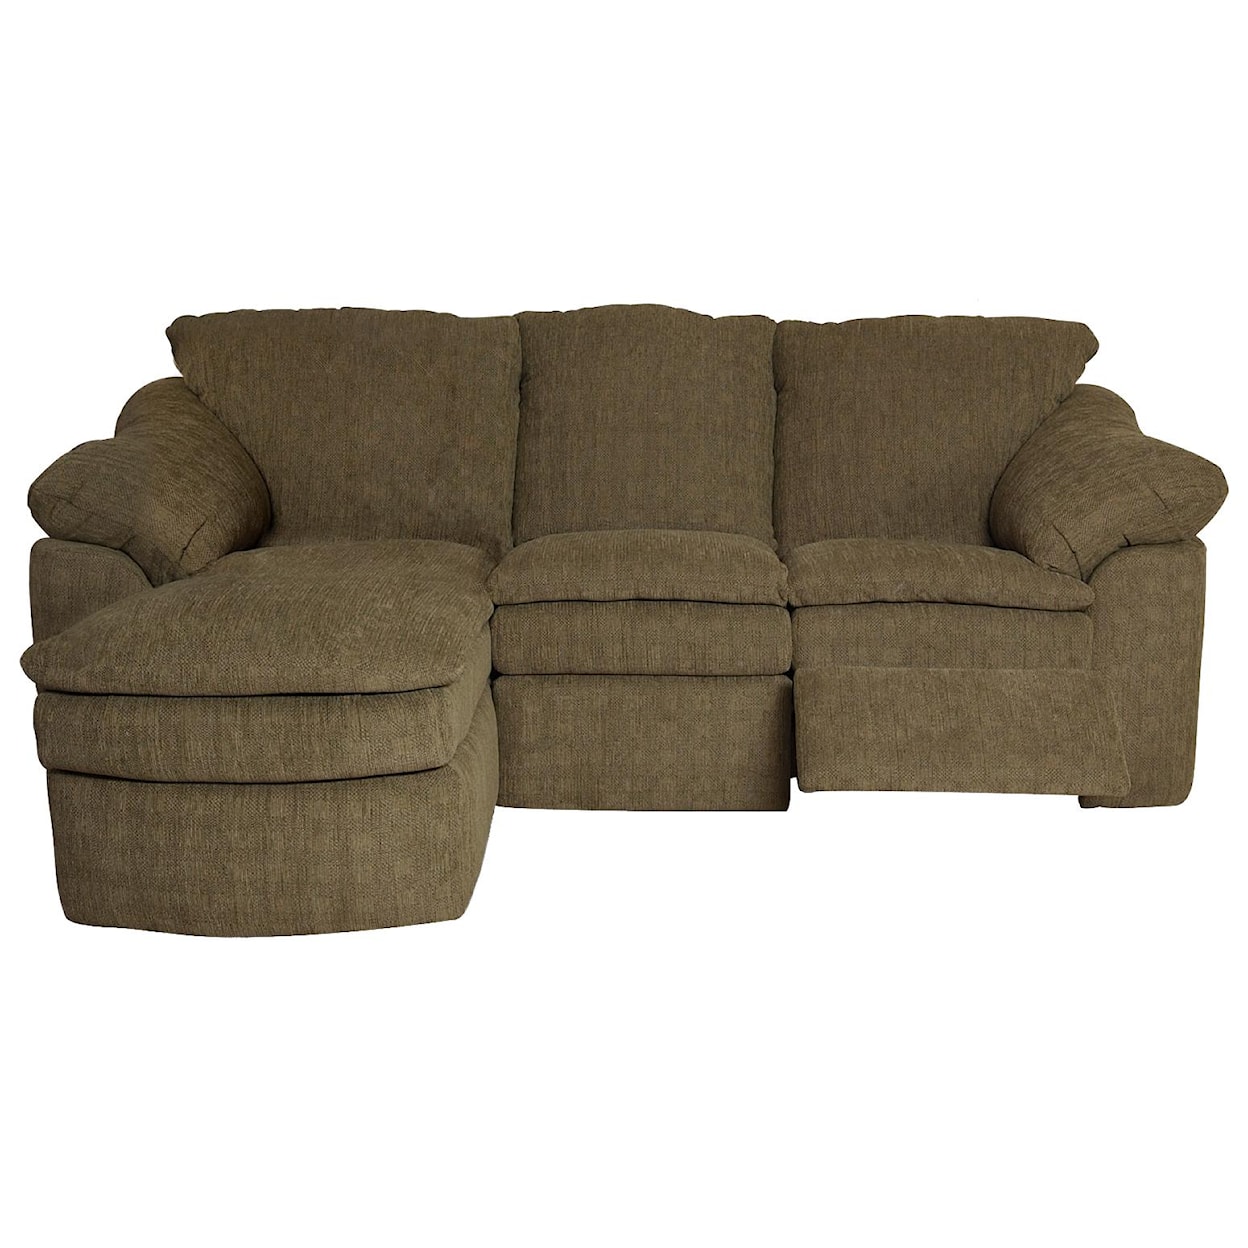 England 7300/L Series Three Piece Reclining Sectional